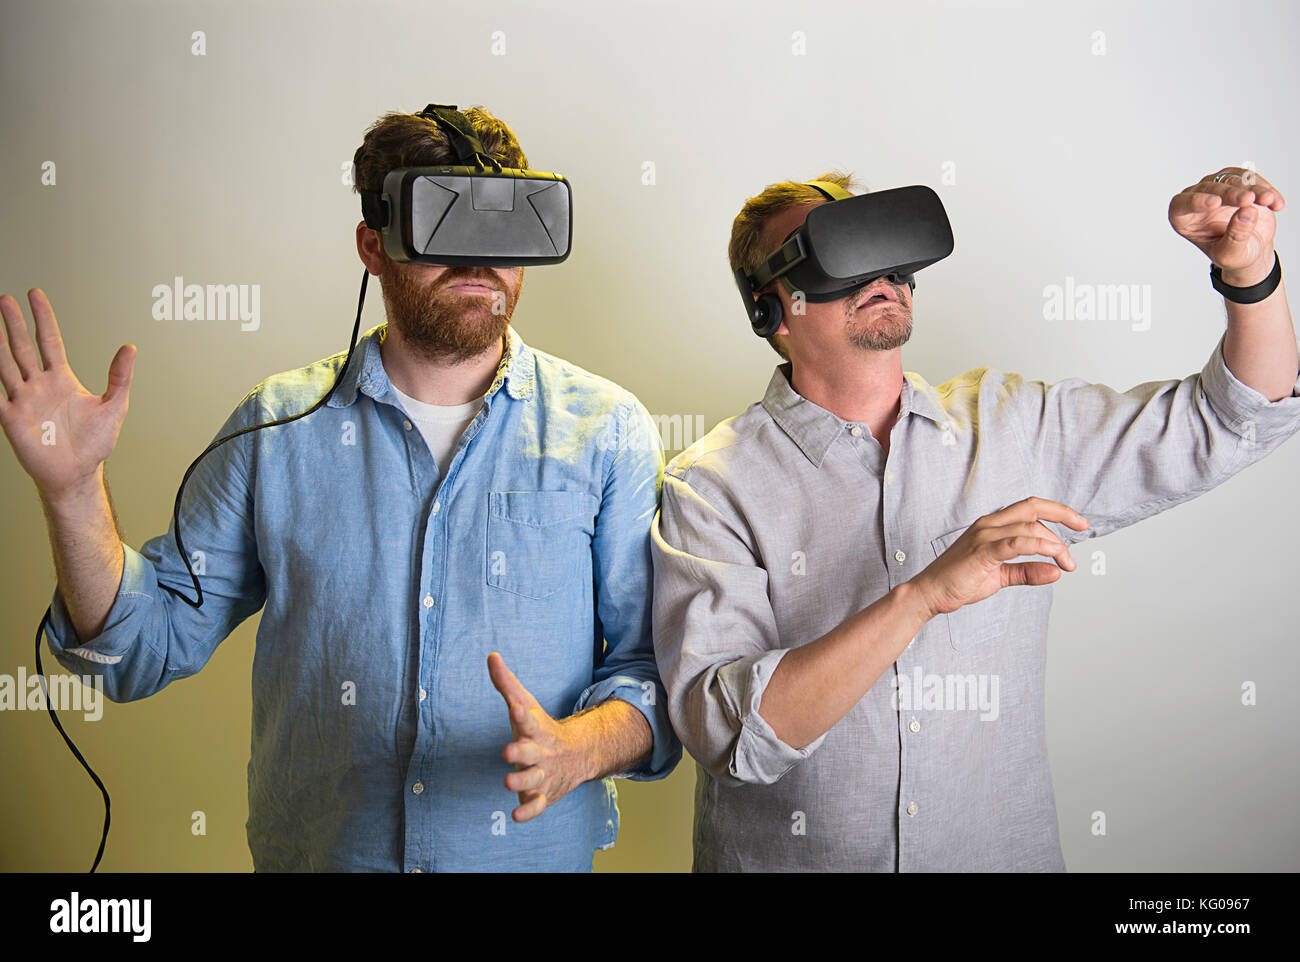 Two men using the Oculus Rift VR headsets, version 2 and 3. Stock Photo